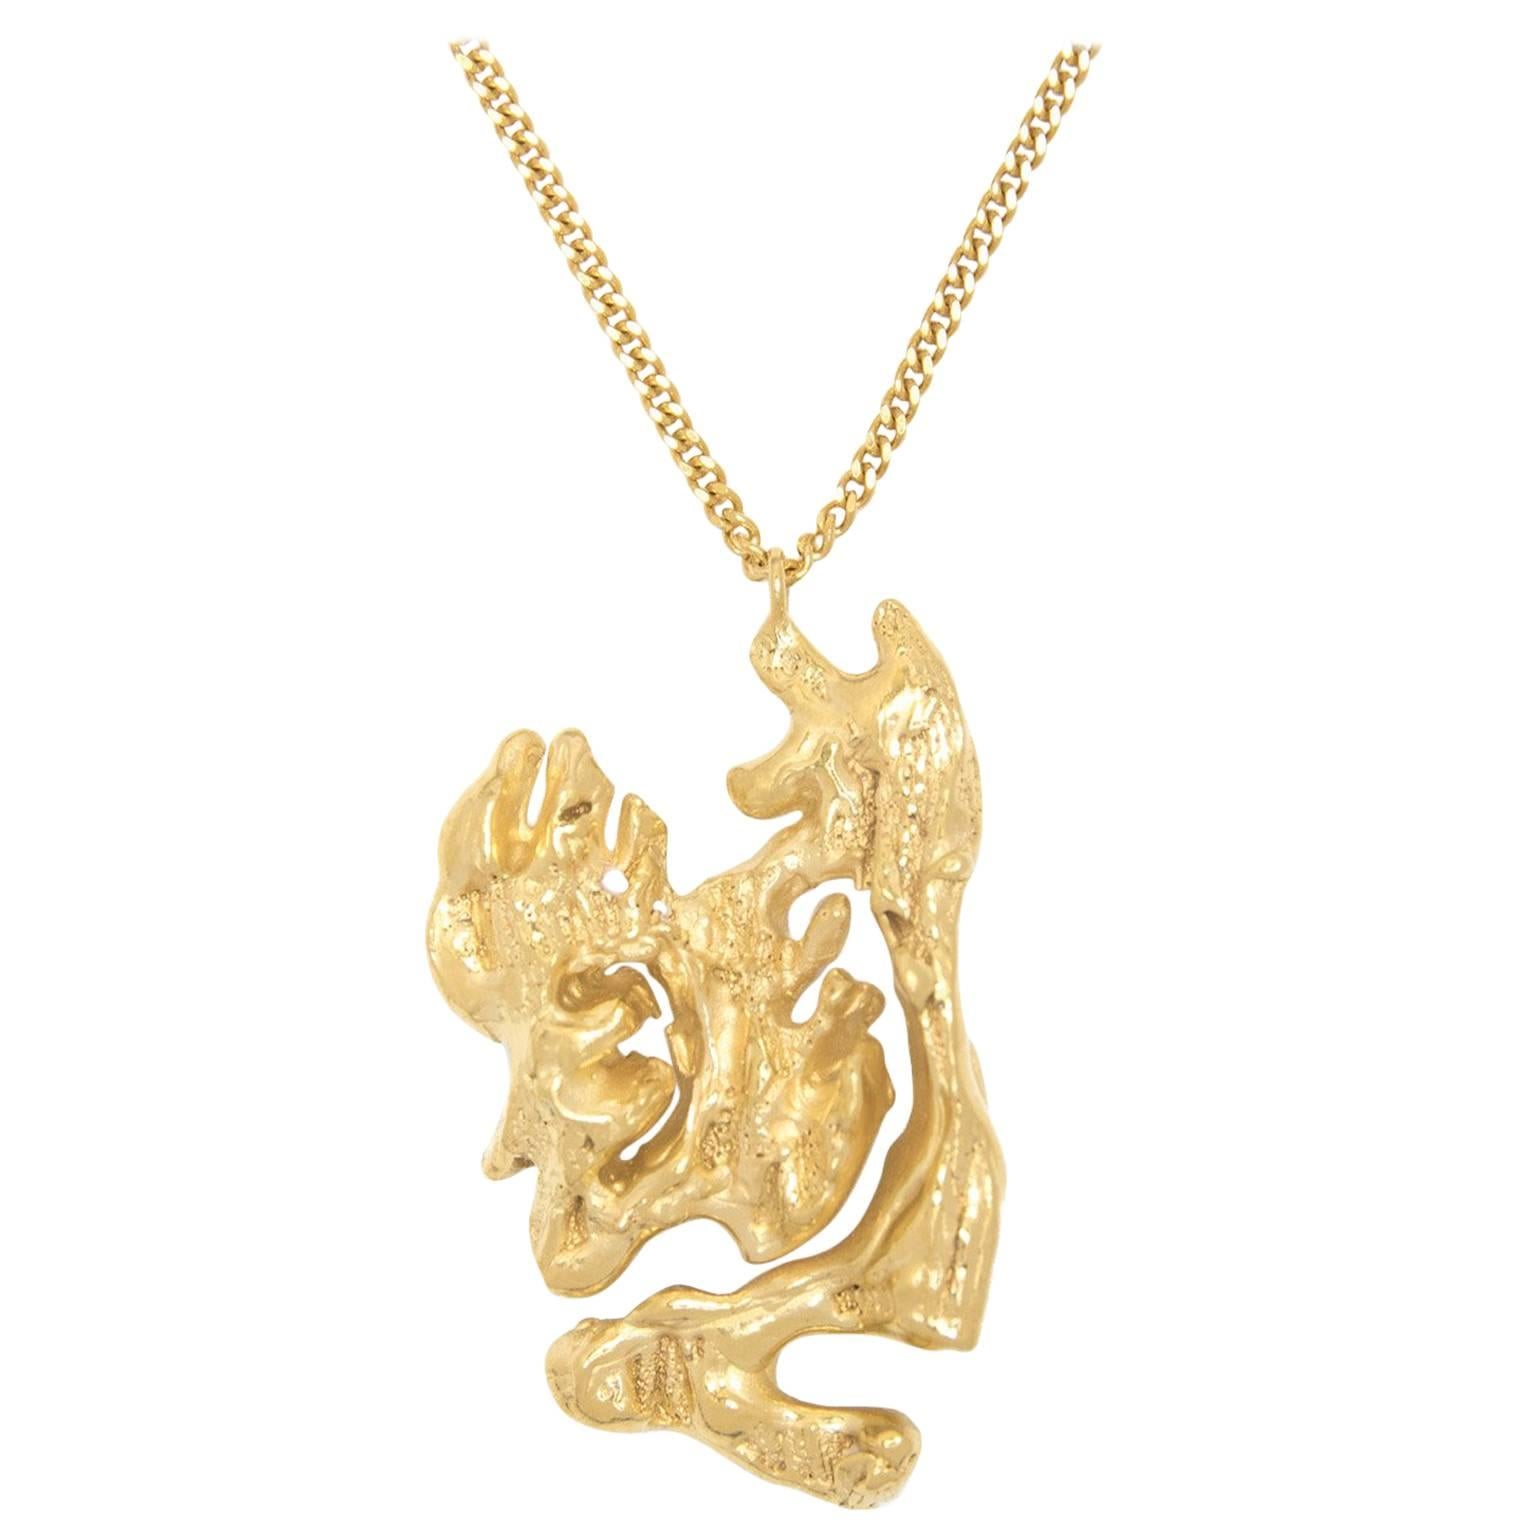 Loveness Lee Chinese Zodiac Rat Horoscope Gold Pendant Necklace For Sale